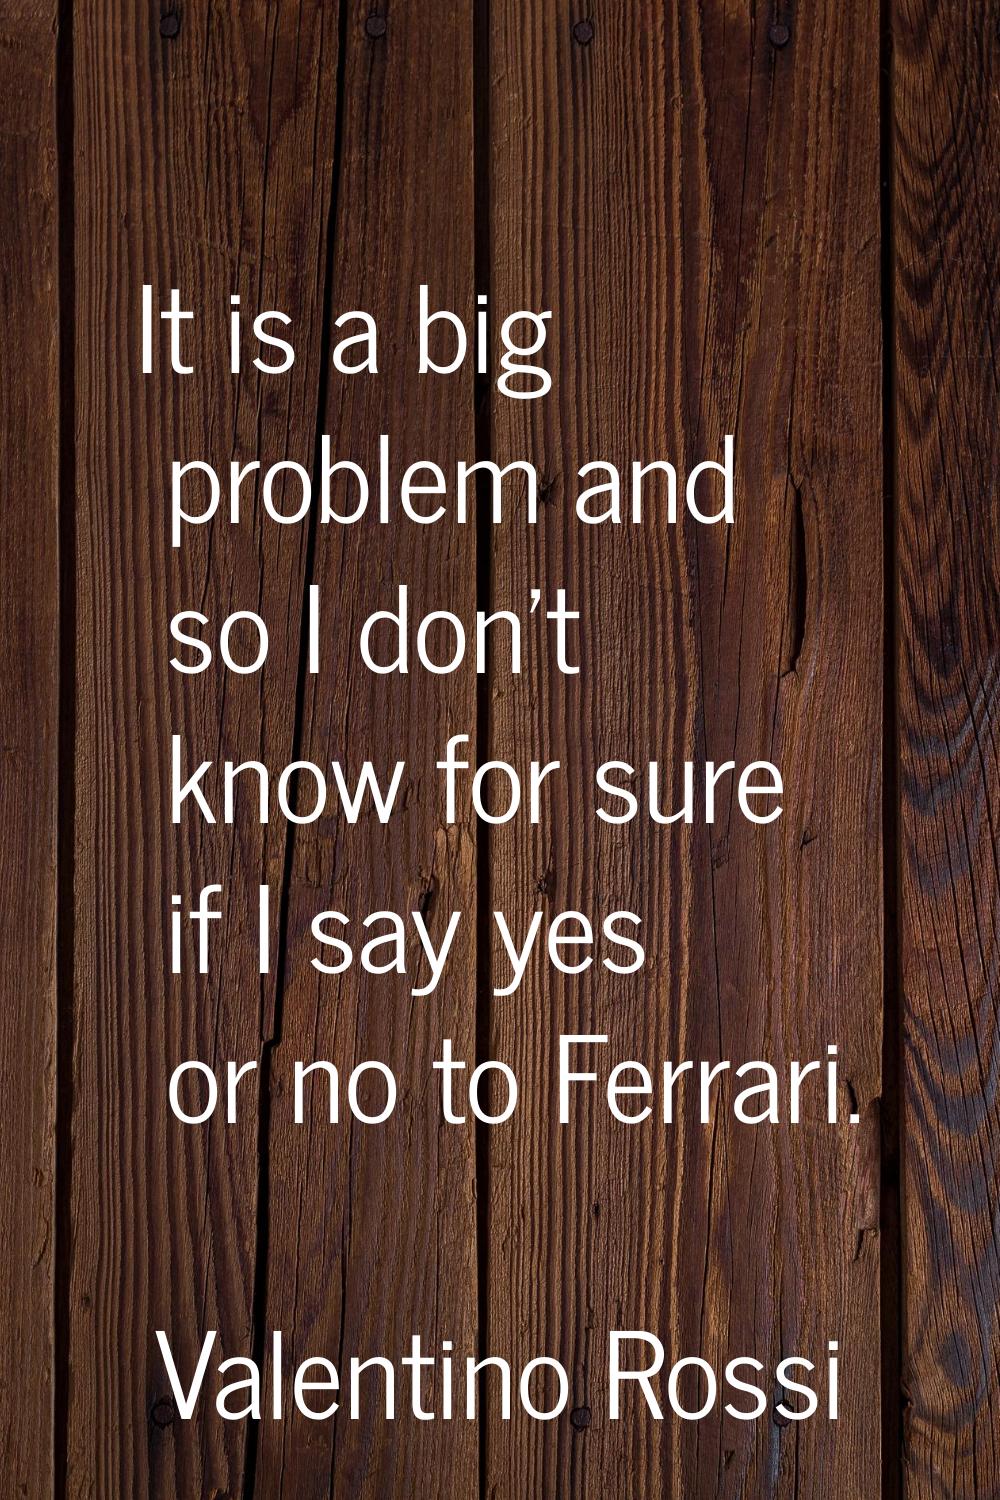 It is a big problem and so I don't know for sure if I say yes or no to Ferrari.